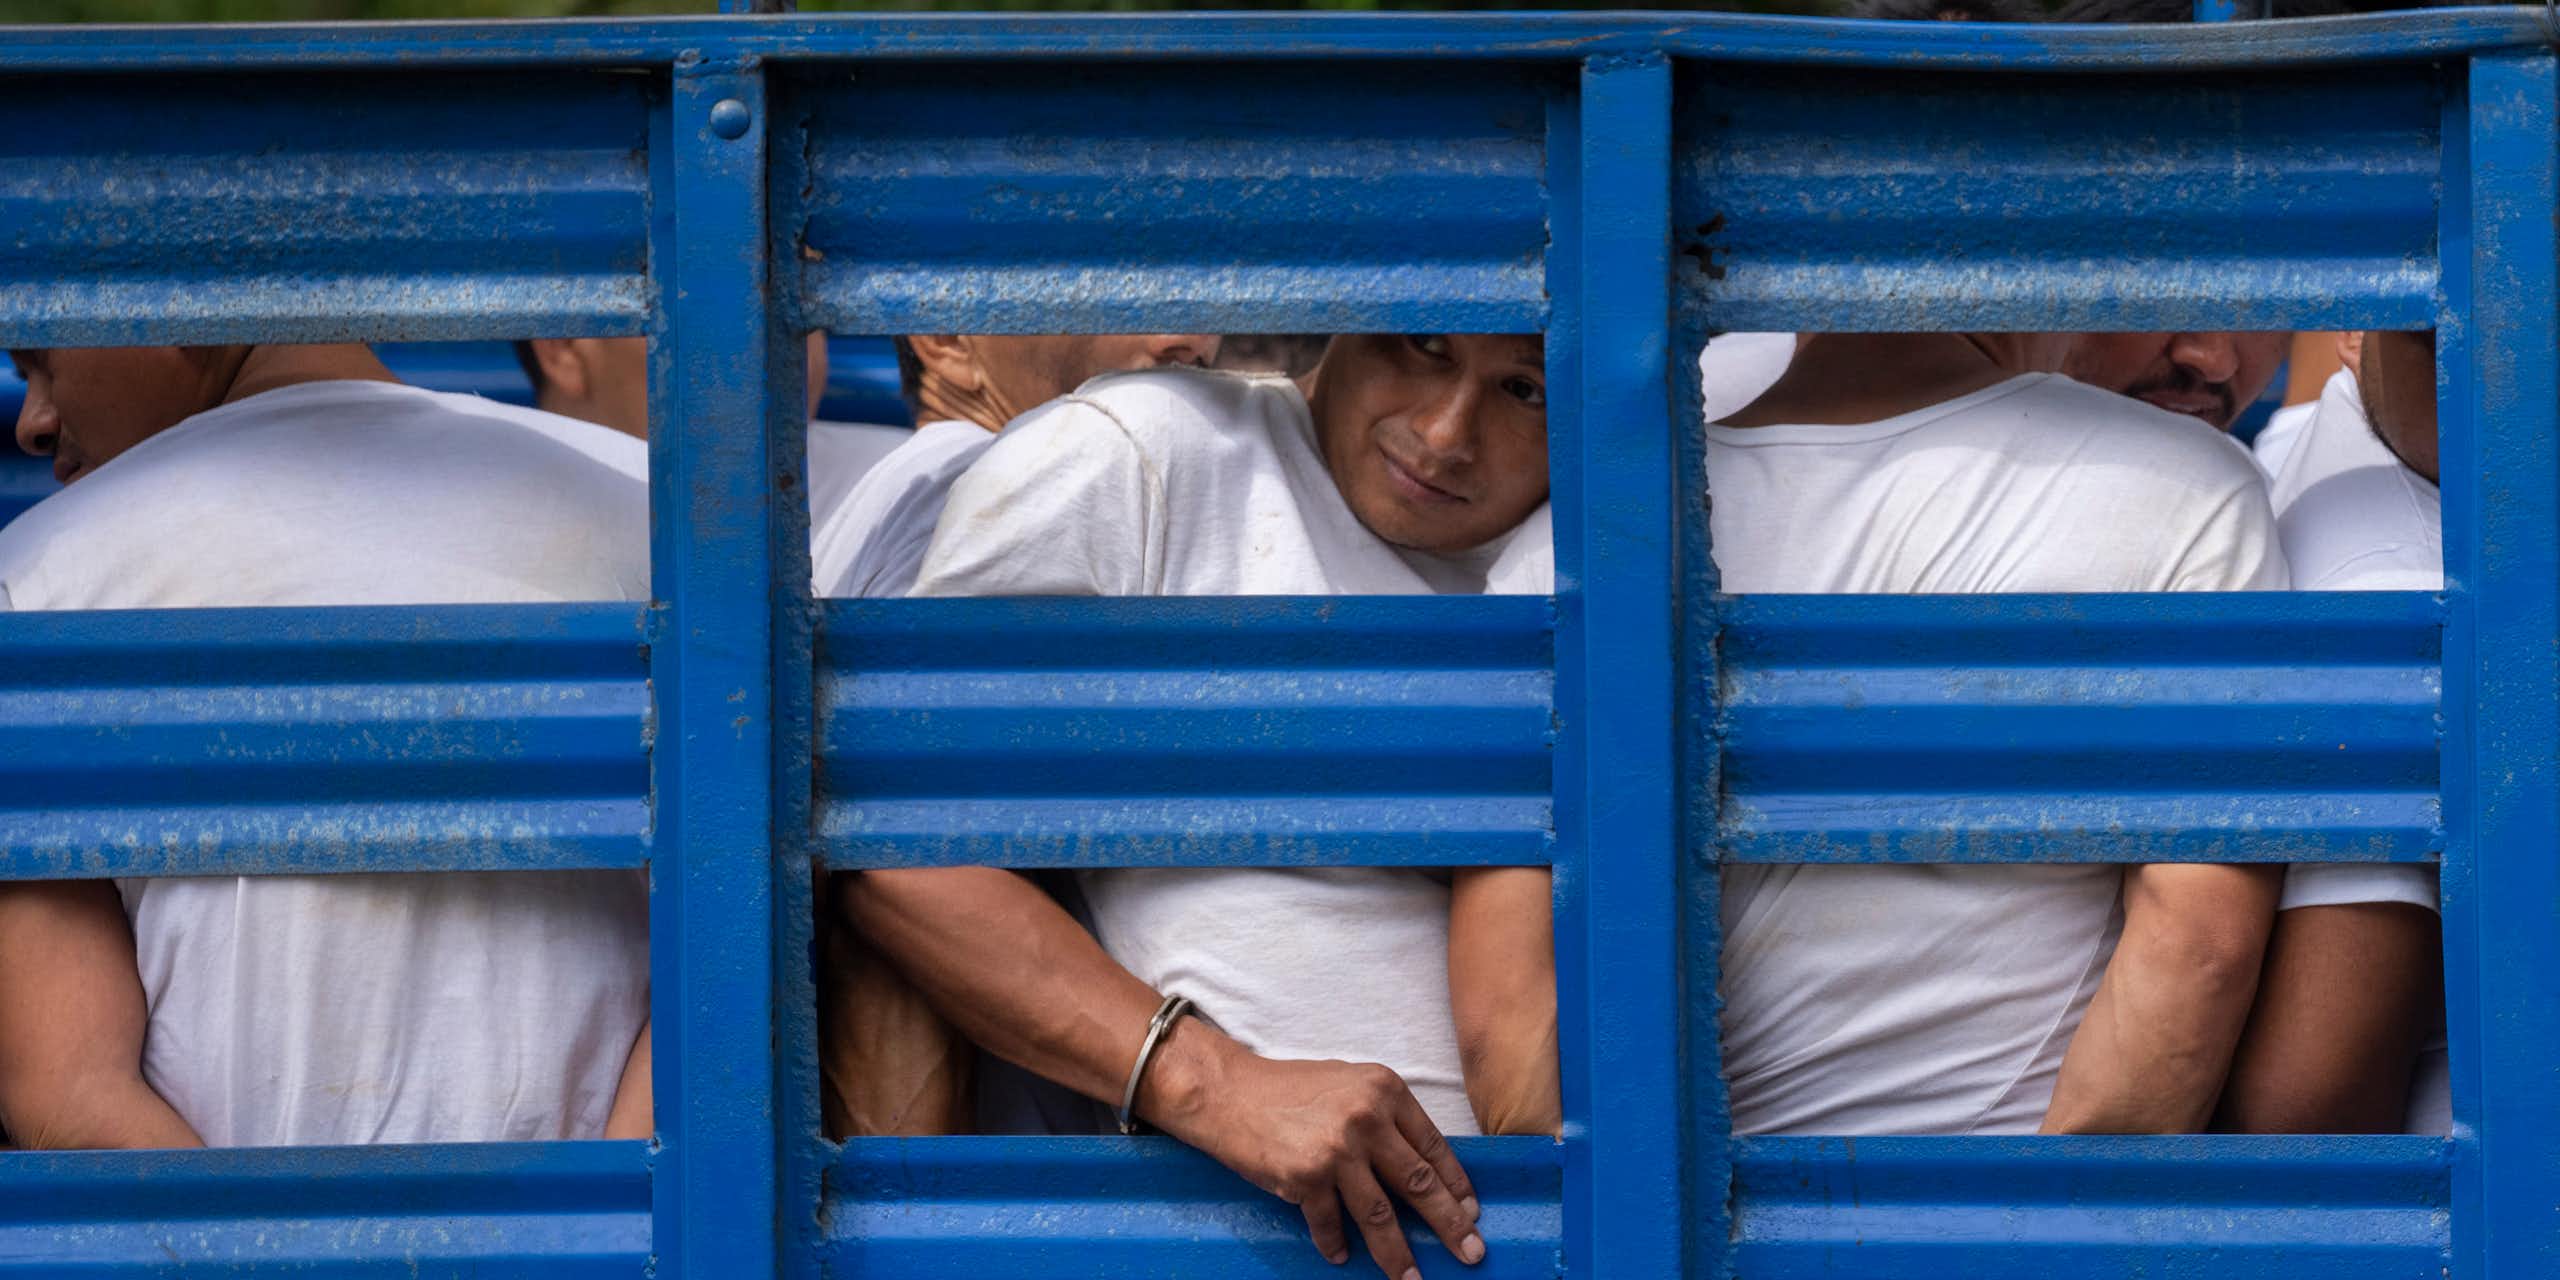 Men with their hands in handcuffs look between the slats of a blue cargo truck.